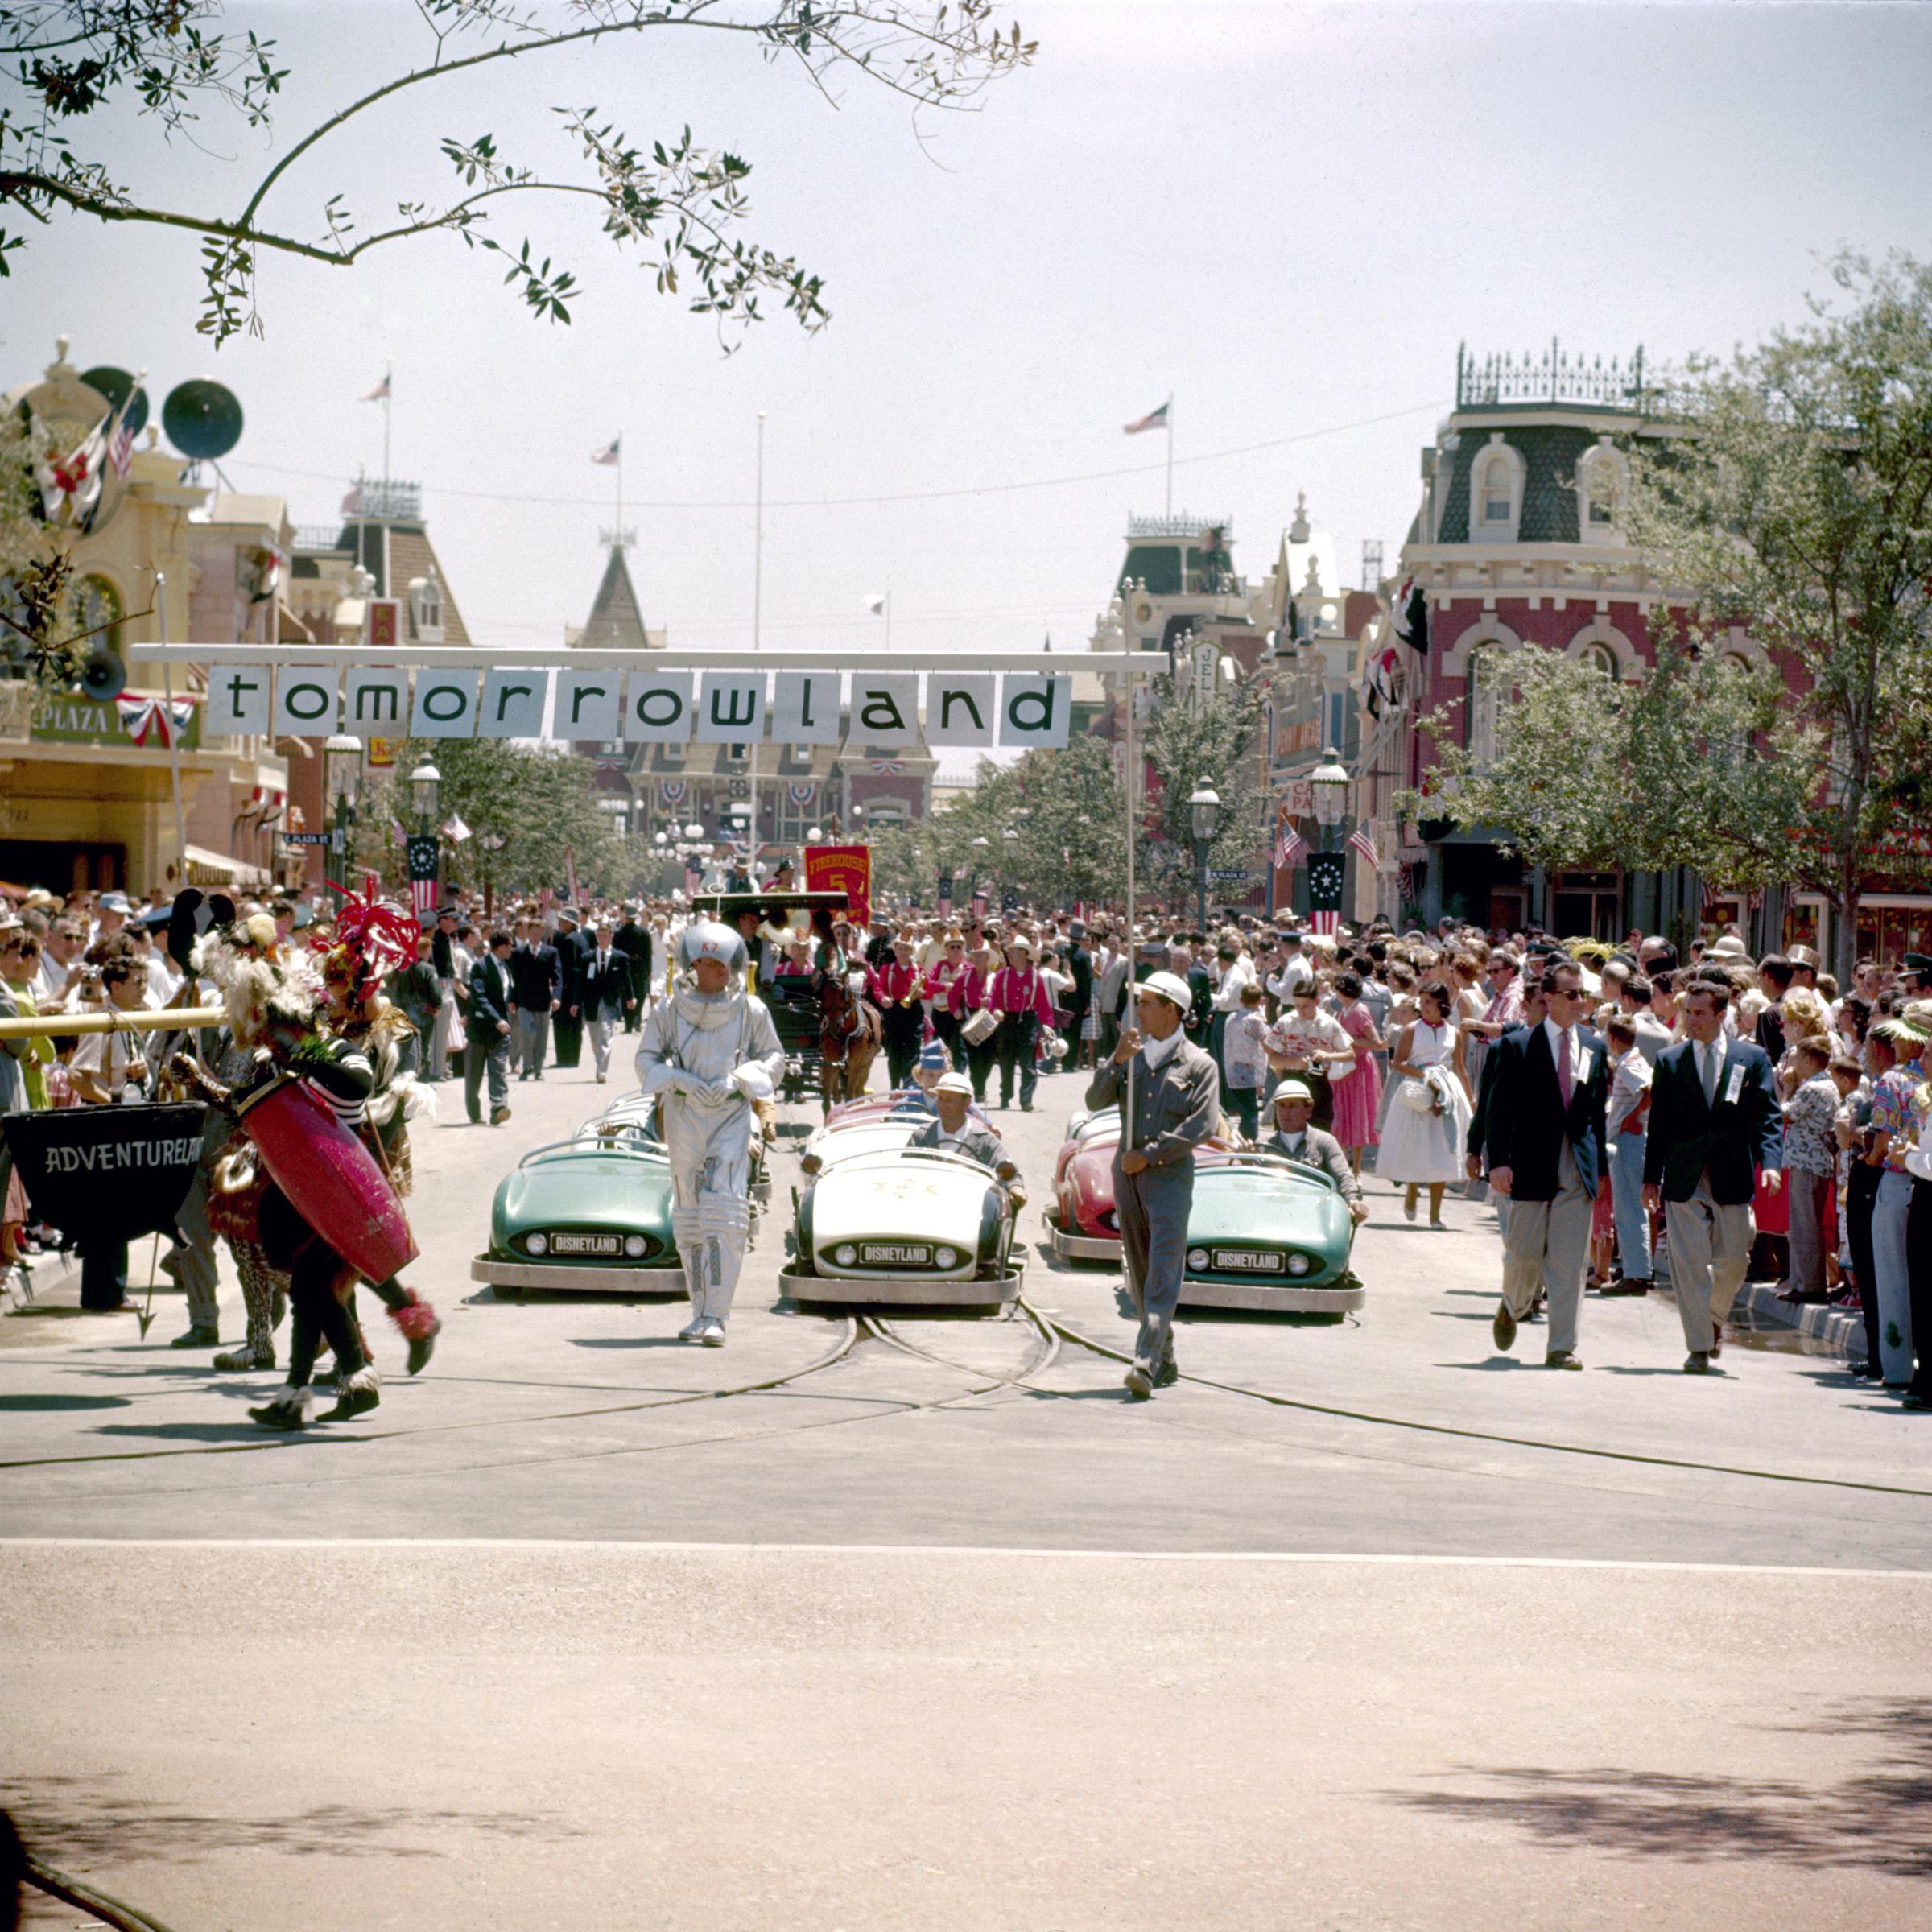 Disneyland Parade done as a preview for national television, 1955.